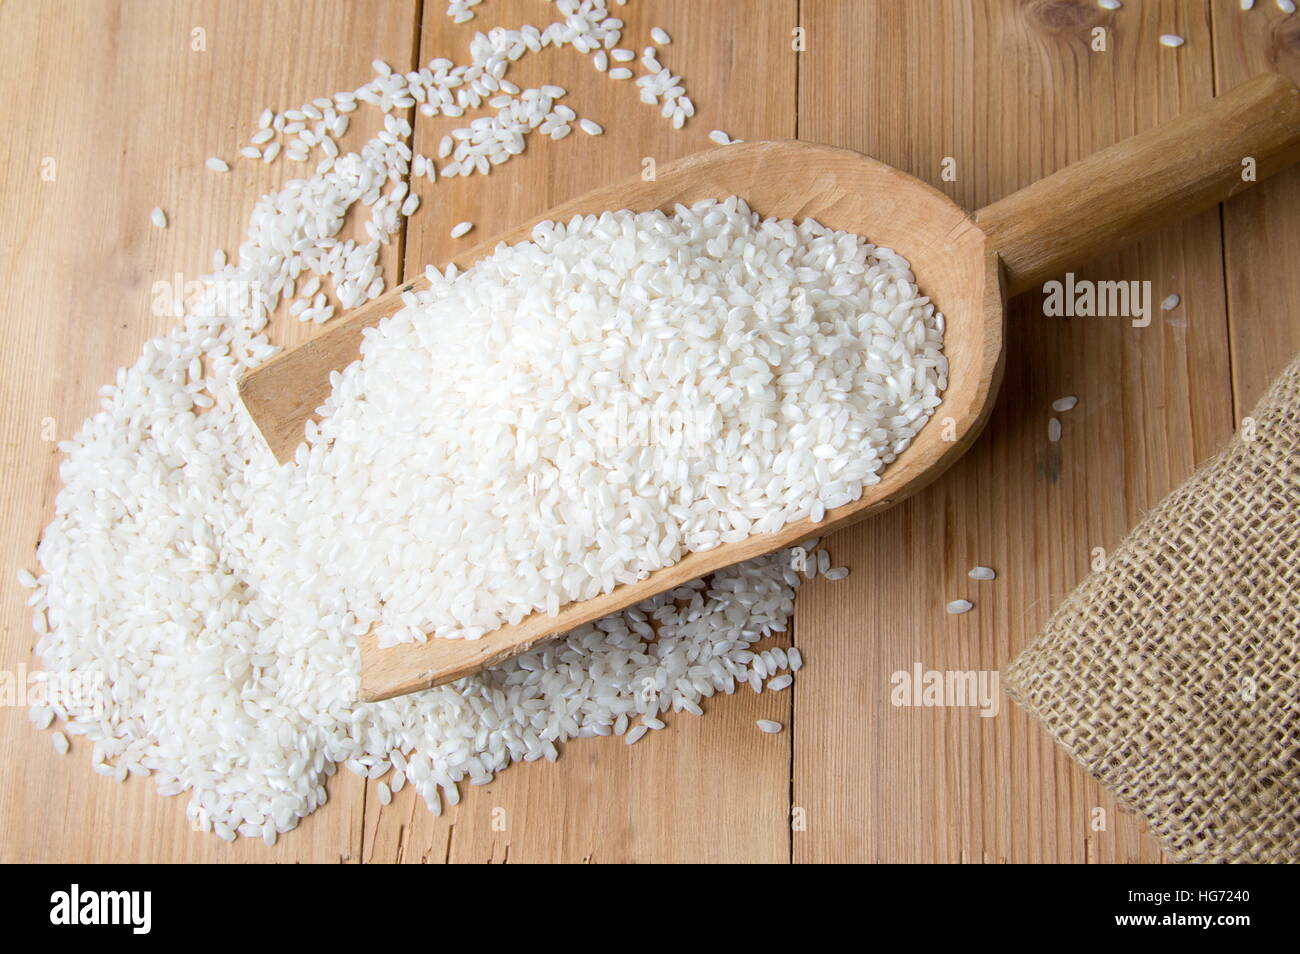 Rice falling out from big wooden spoon Stock Photo